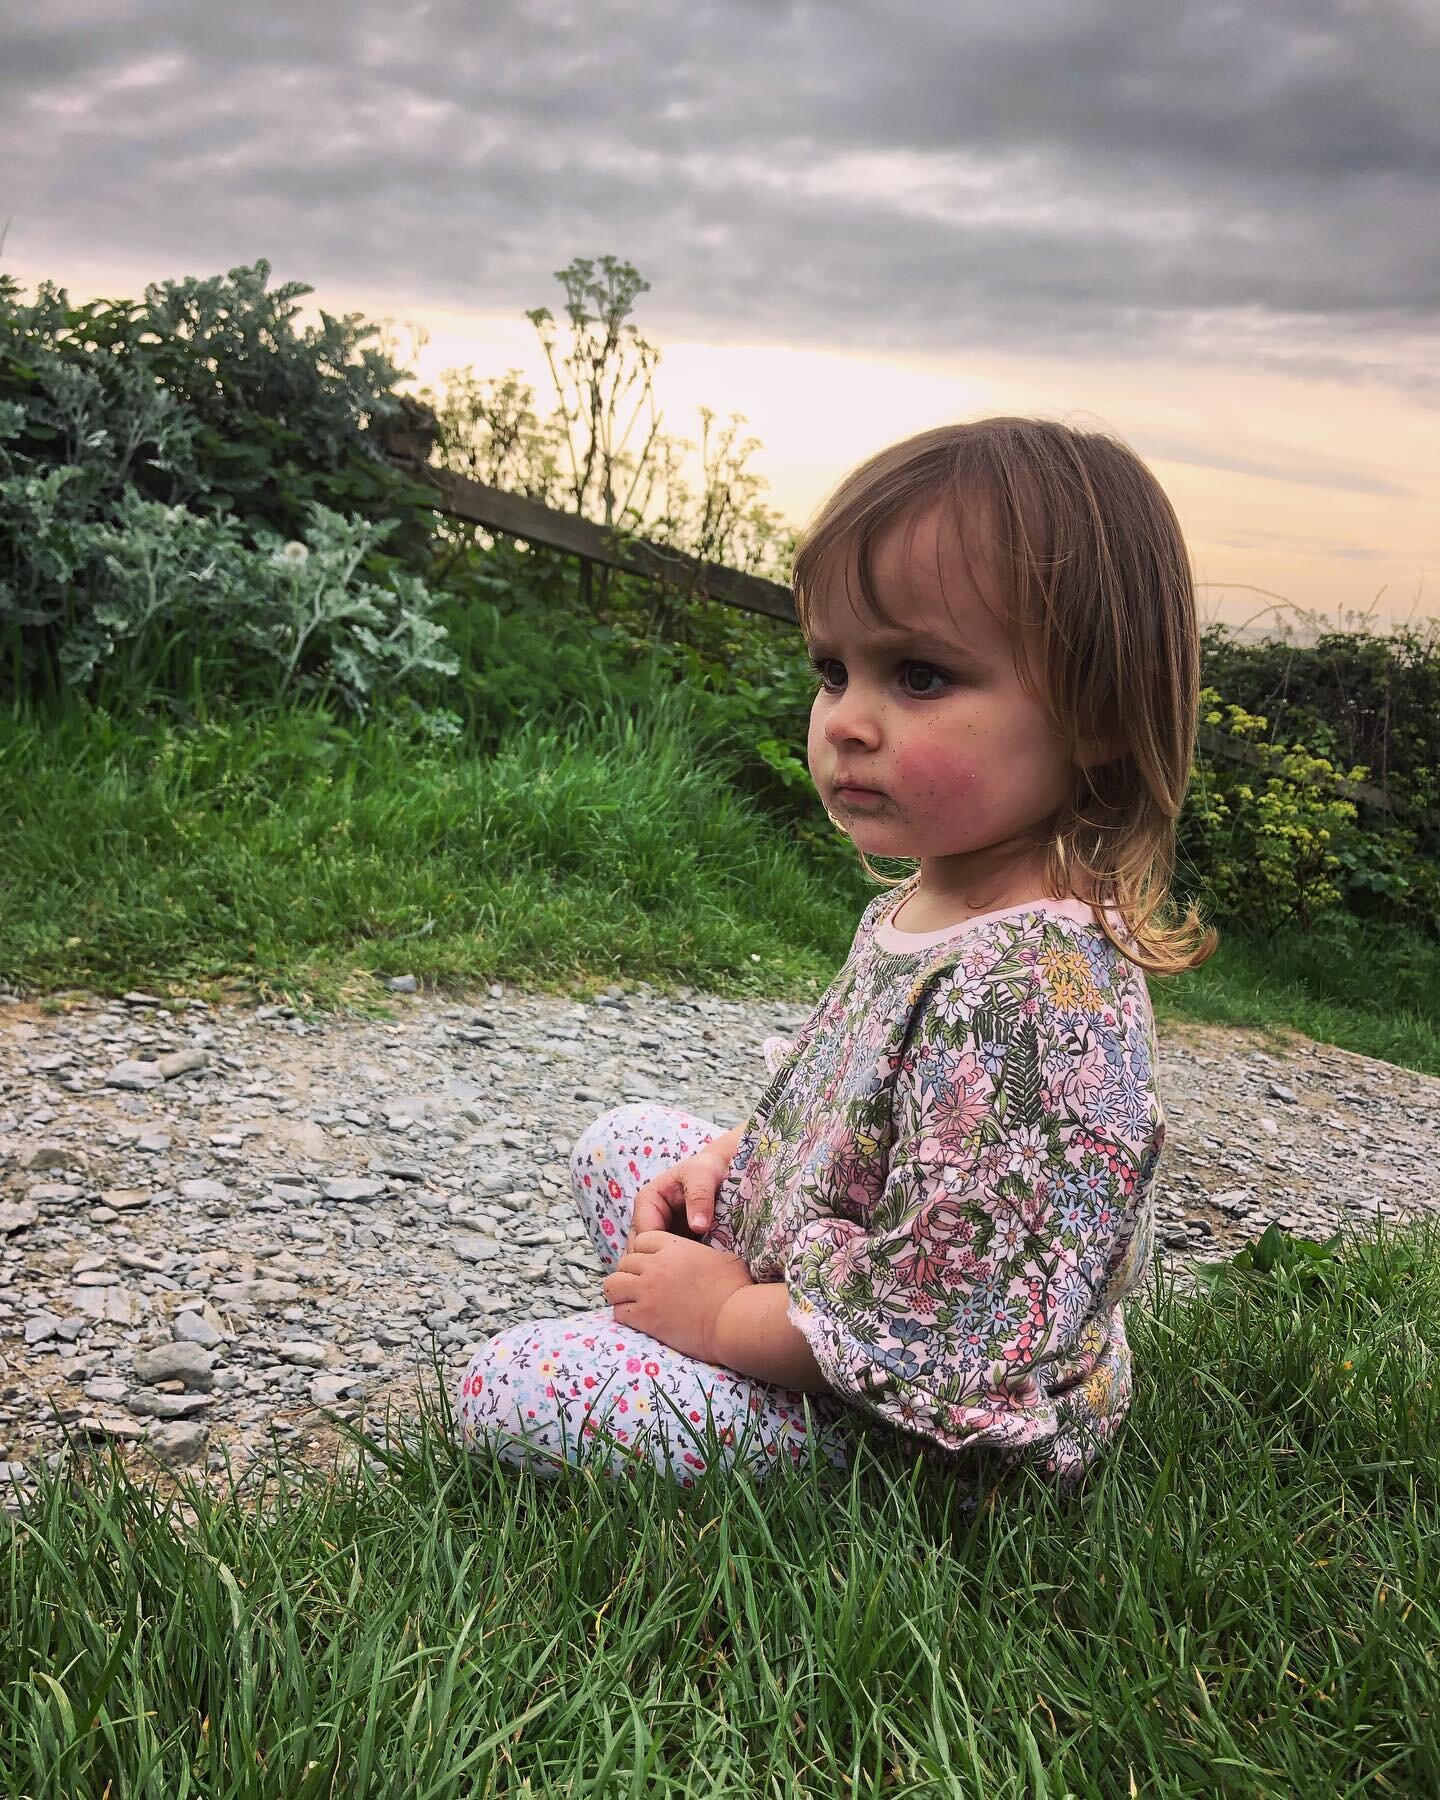 🥀🌹Emotions🌹🥀

Ruby is starting to understand emotions.
Just after this photo she looked at me and as she looked down said &lsquo;little bit sad.&rsquo;

Her expression, the way she held her body, her own hand, her voice tone, her eyes and her ene